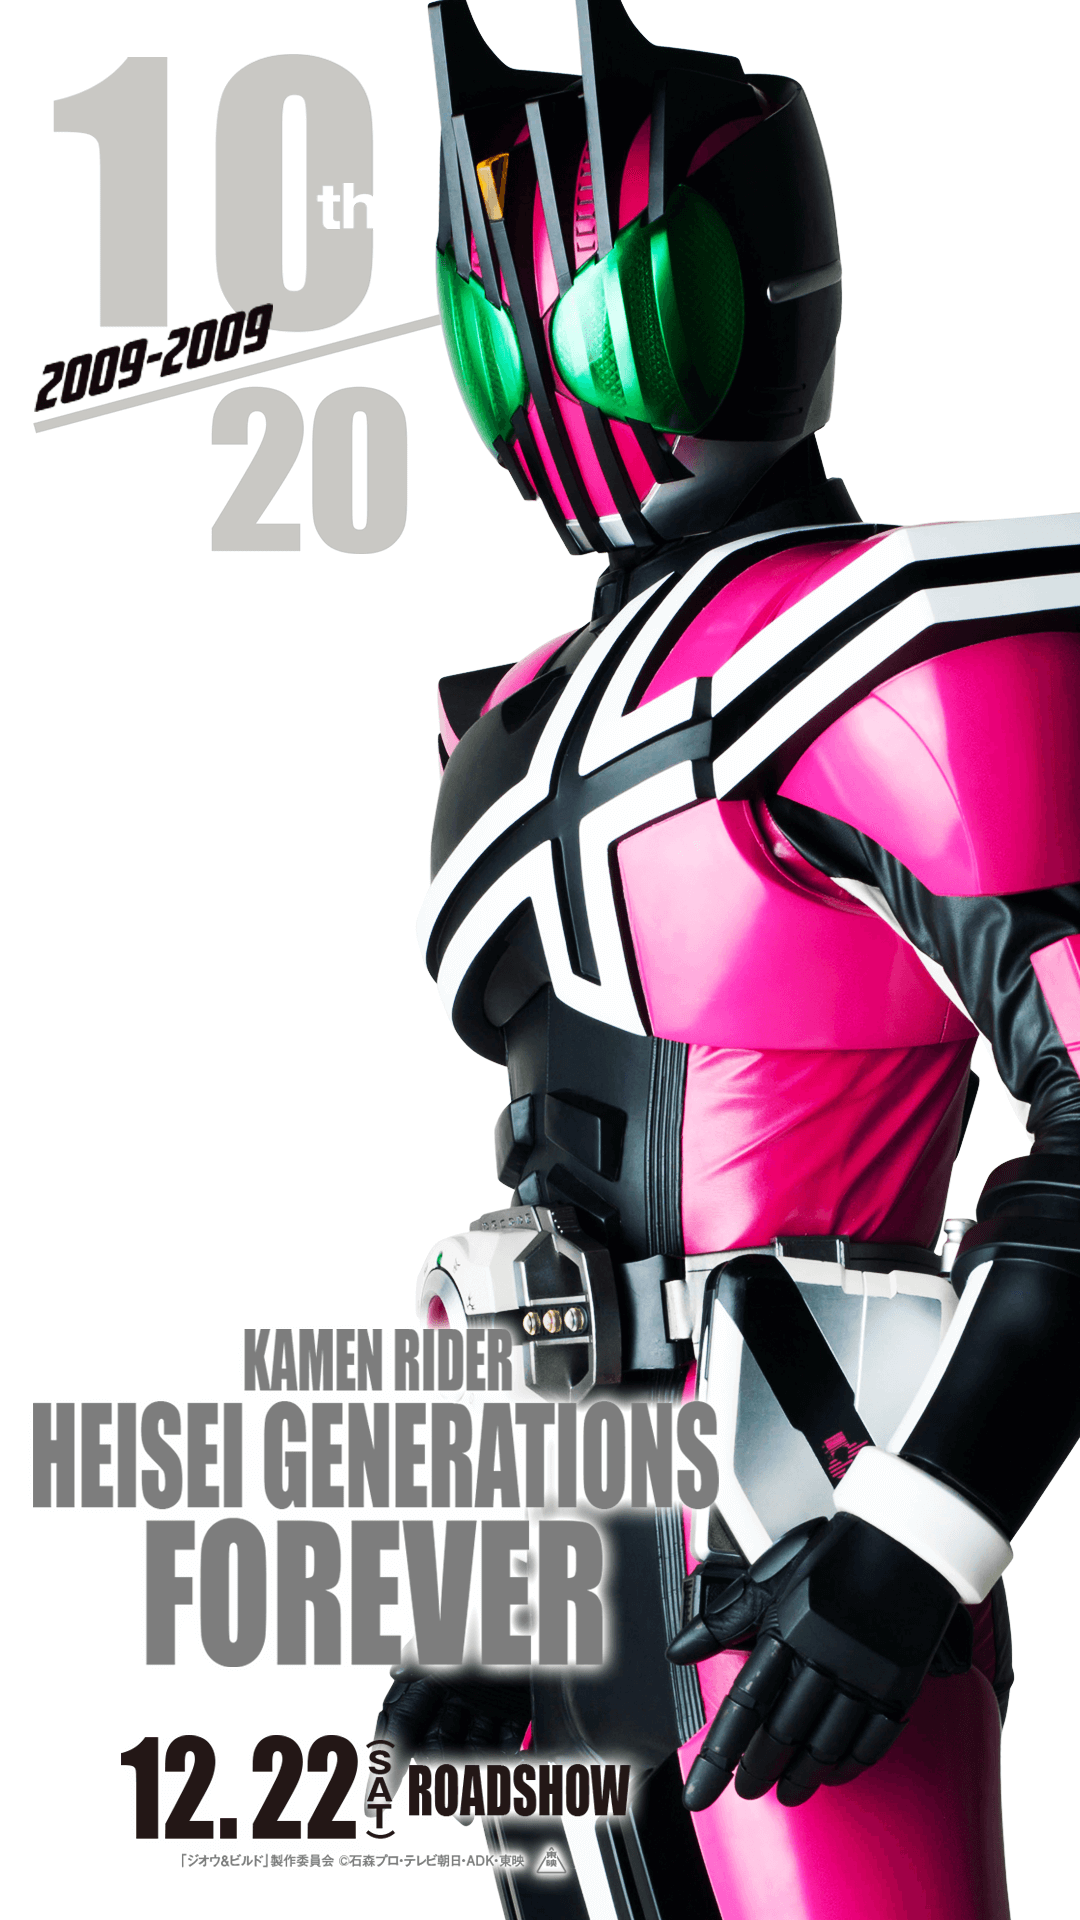 Kamen Rider Twitter Campaign Encourages Fans to Share Their Favorite